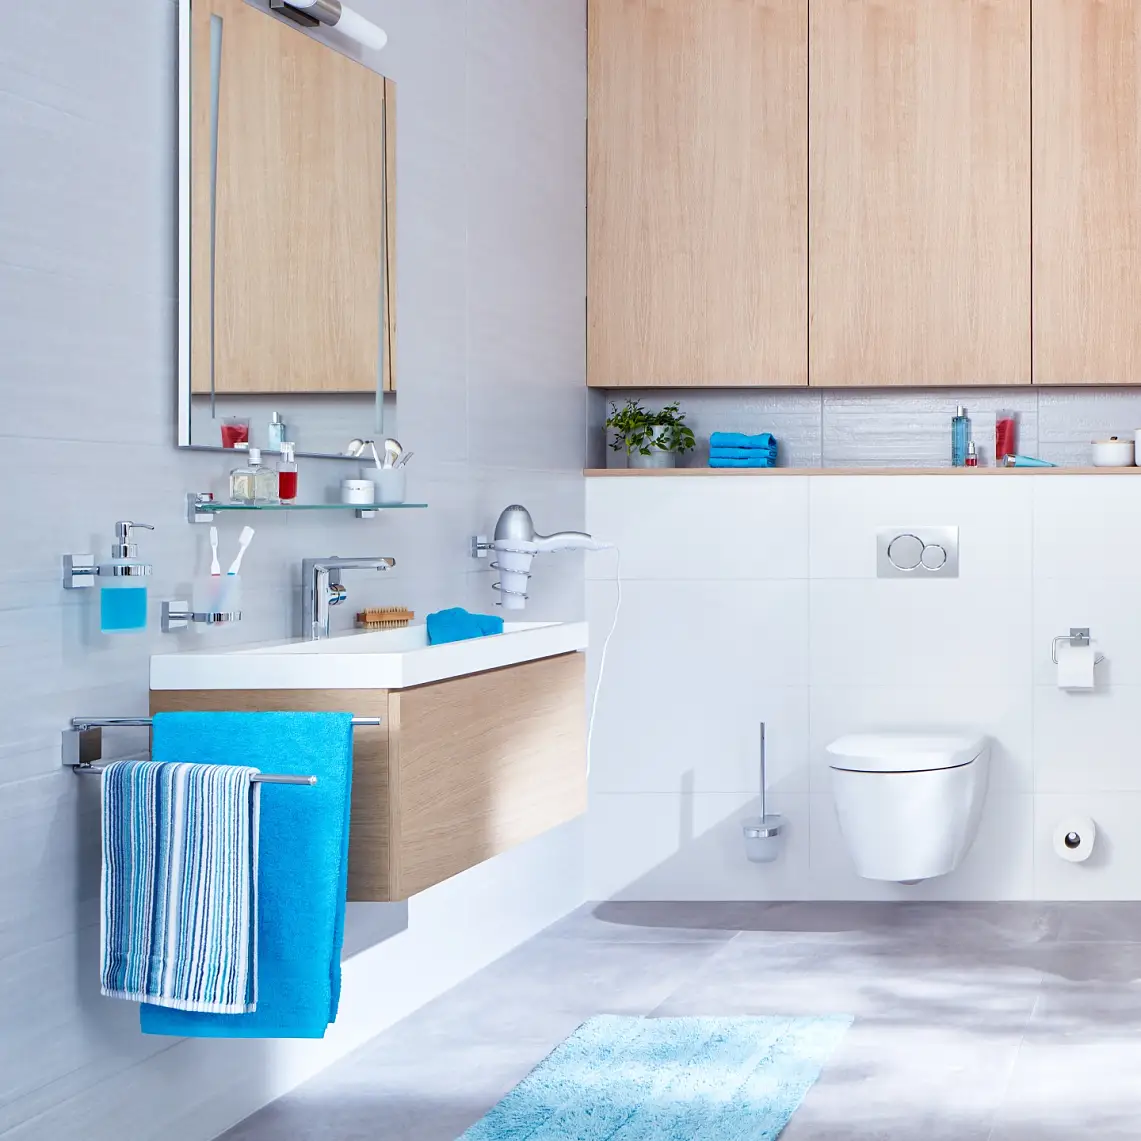 Clear design and straight structures for an organized bathroom experience.